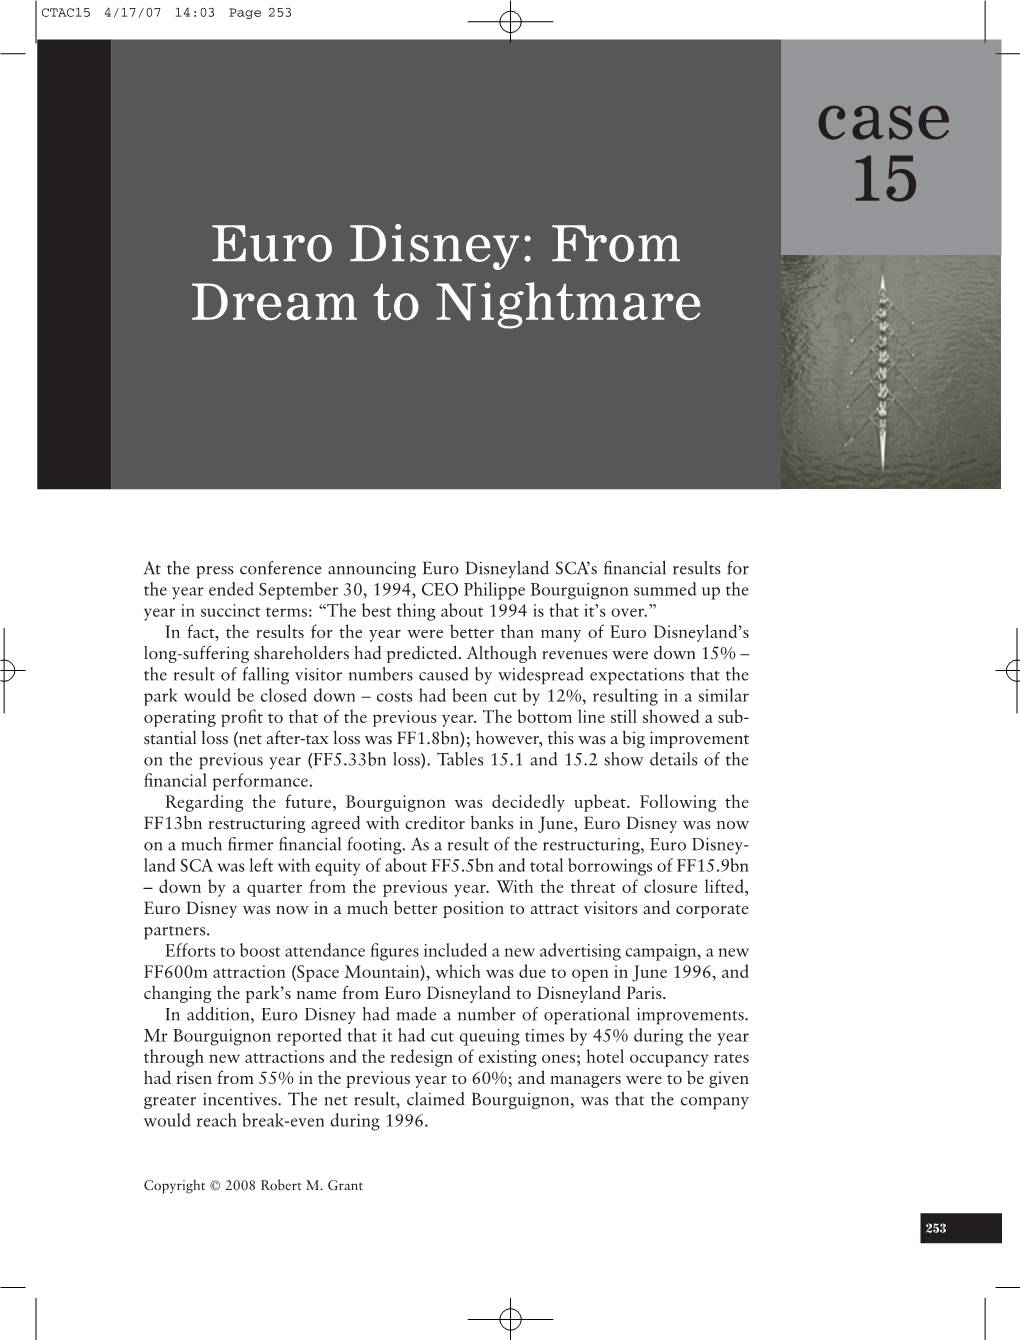 Case 15 Euro Disney: from Dream to Nightmare